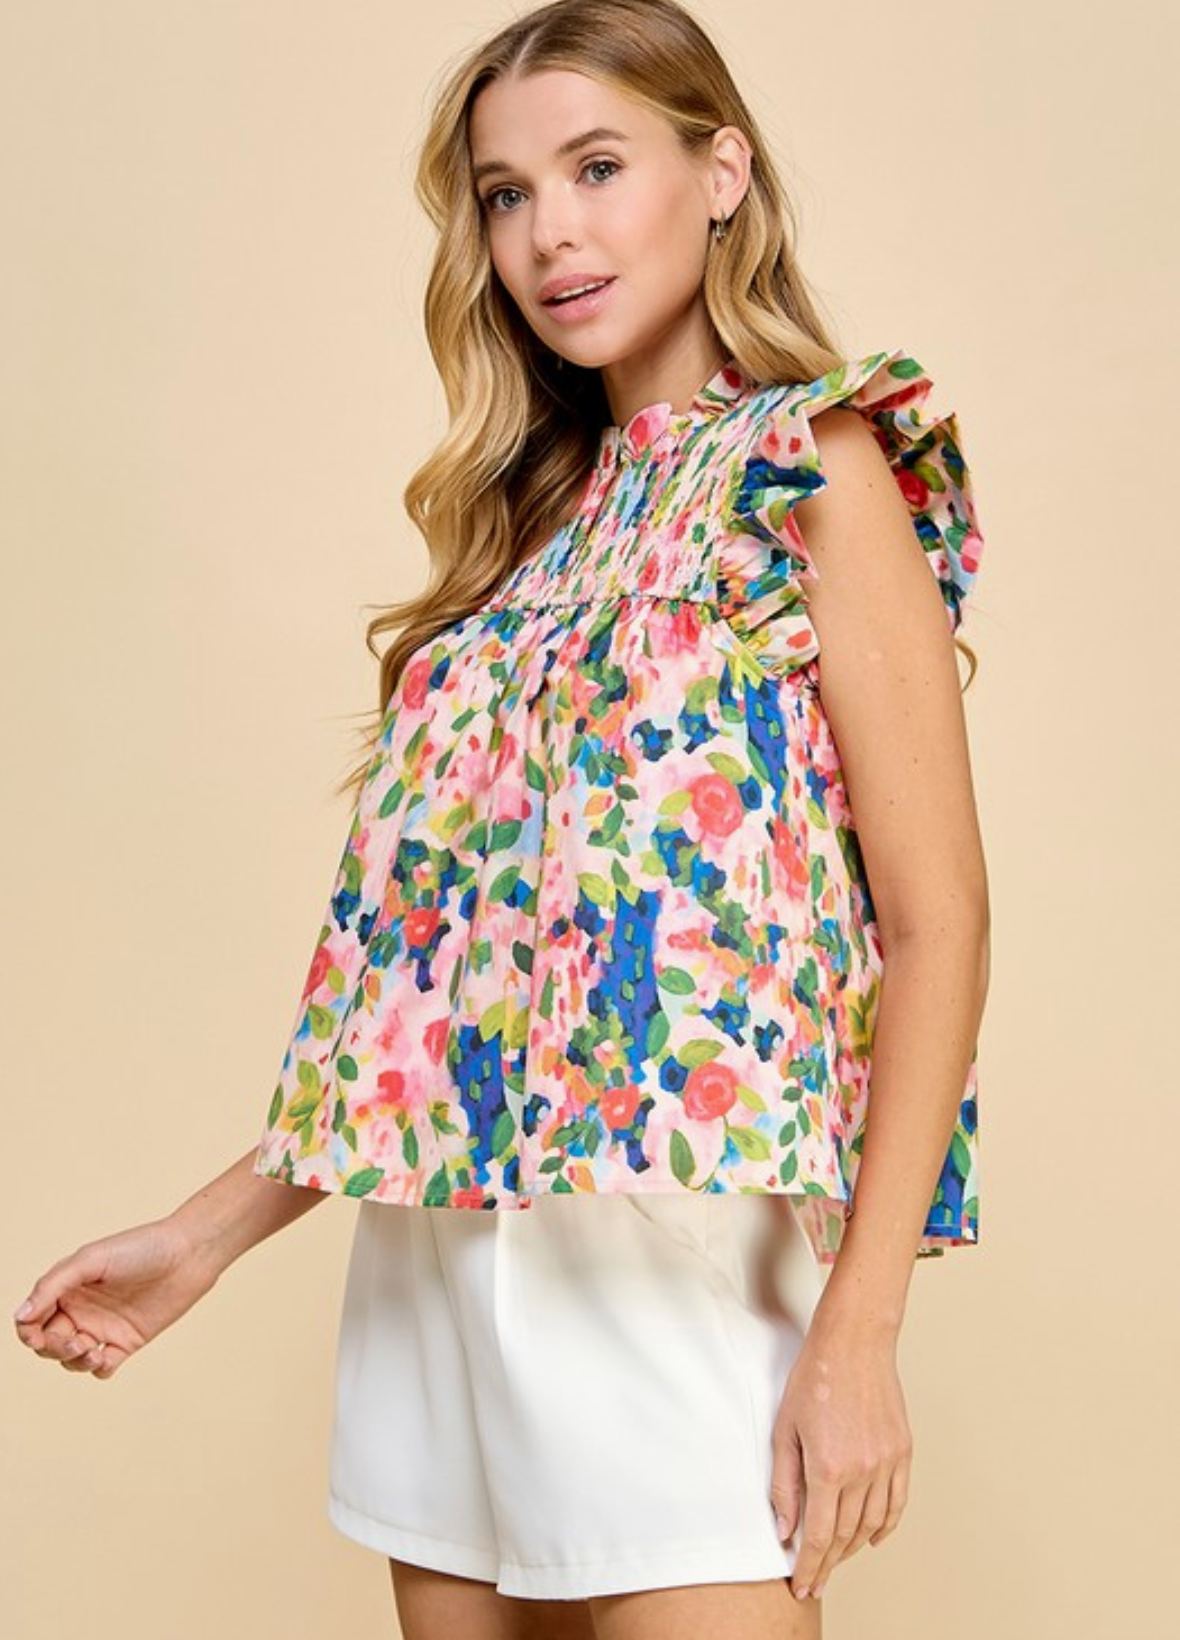 Floral Print Ruffle Top in Blush Multi - The Street Boutique 